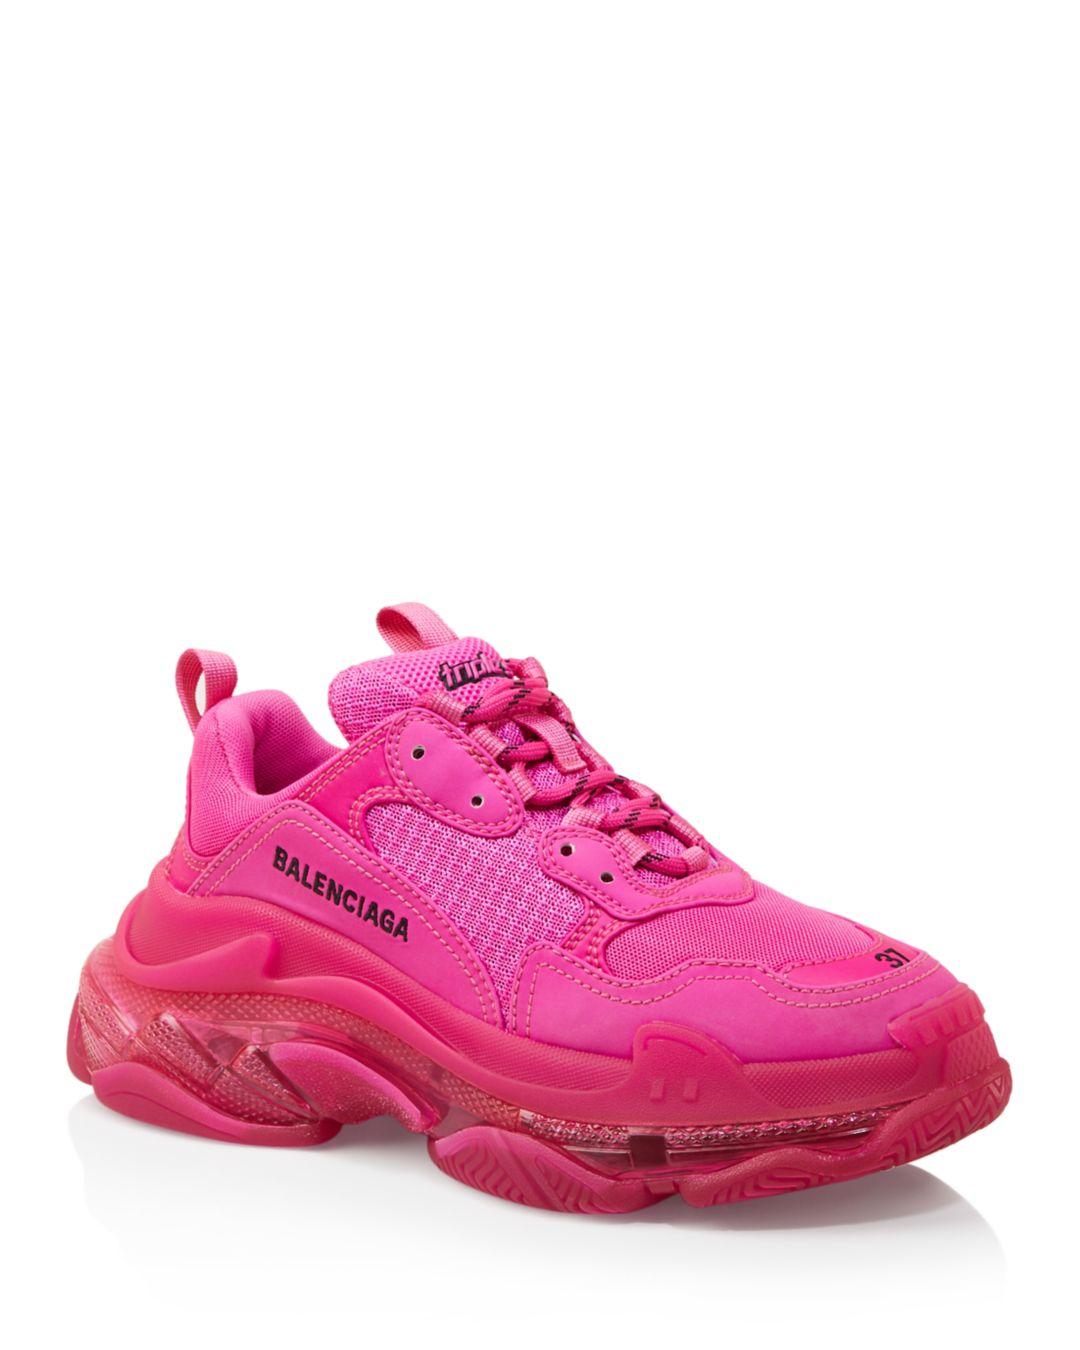 Balenciaga Triple S Sneaker in Pink/Pink Neon (Pink) - Save 60% | Lyst